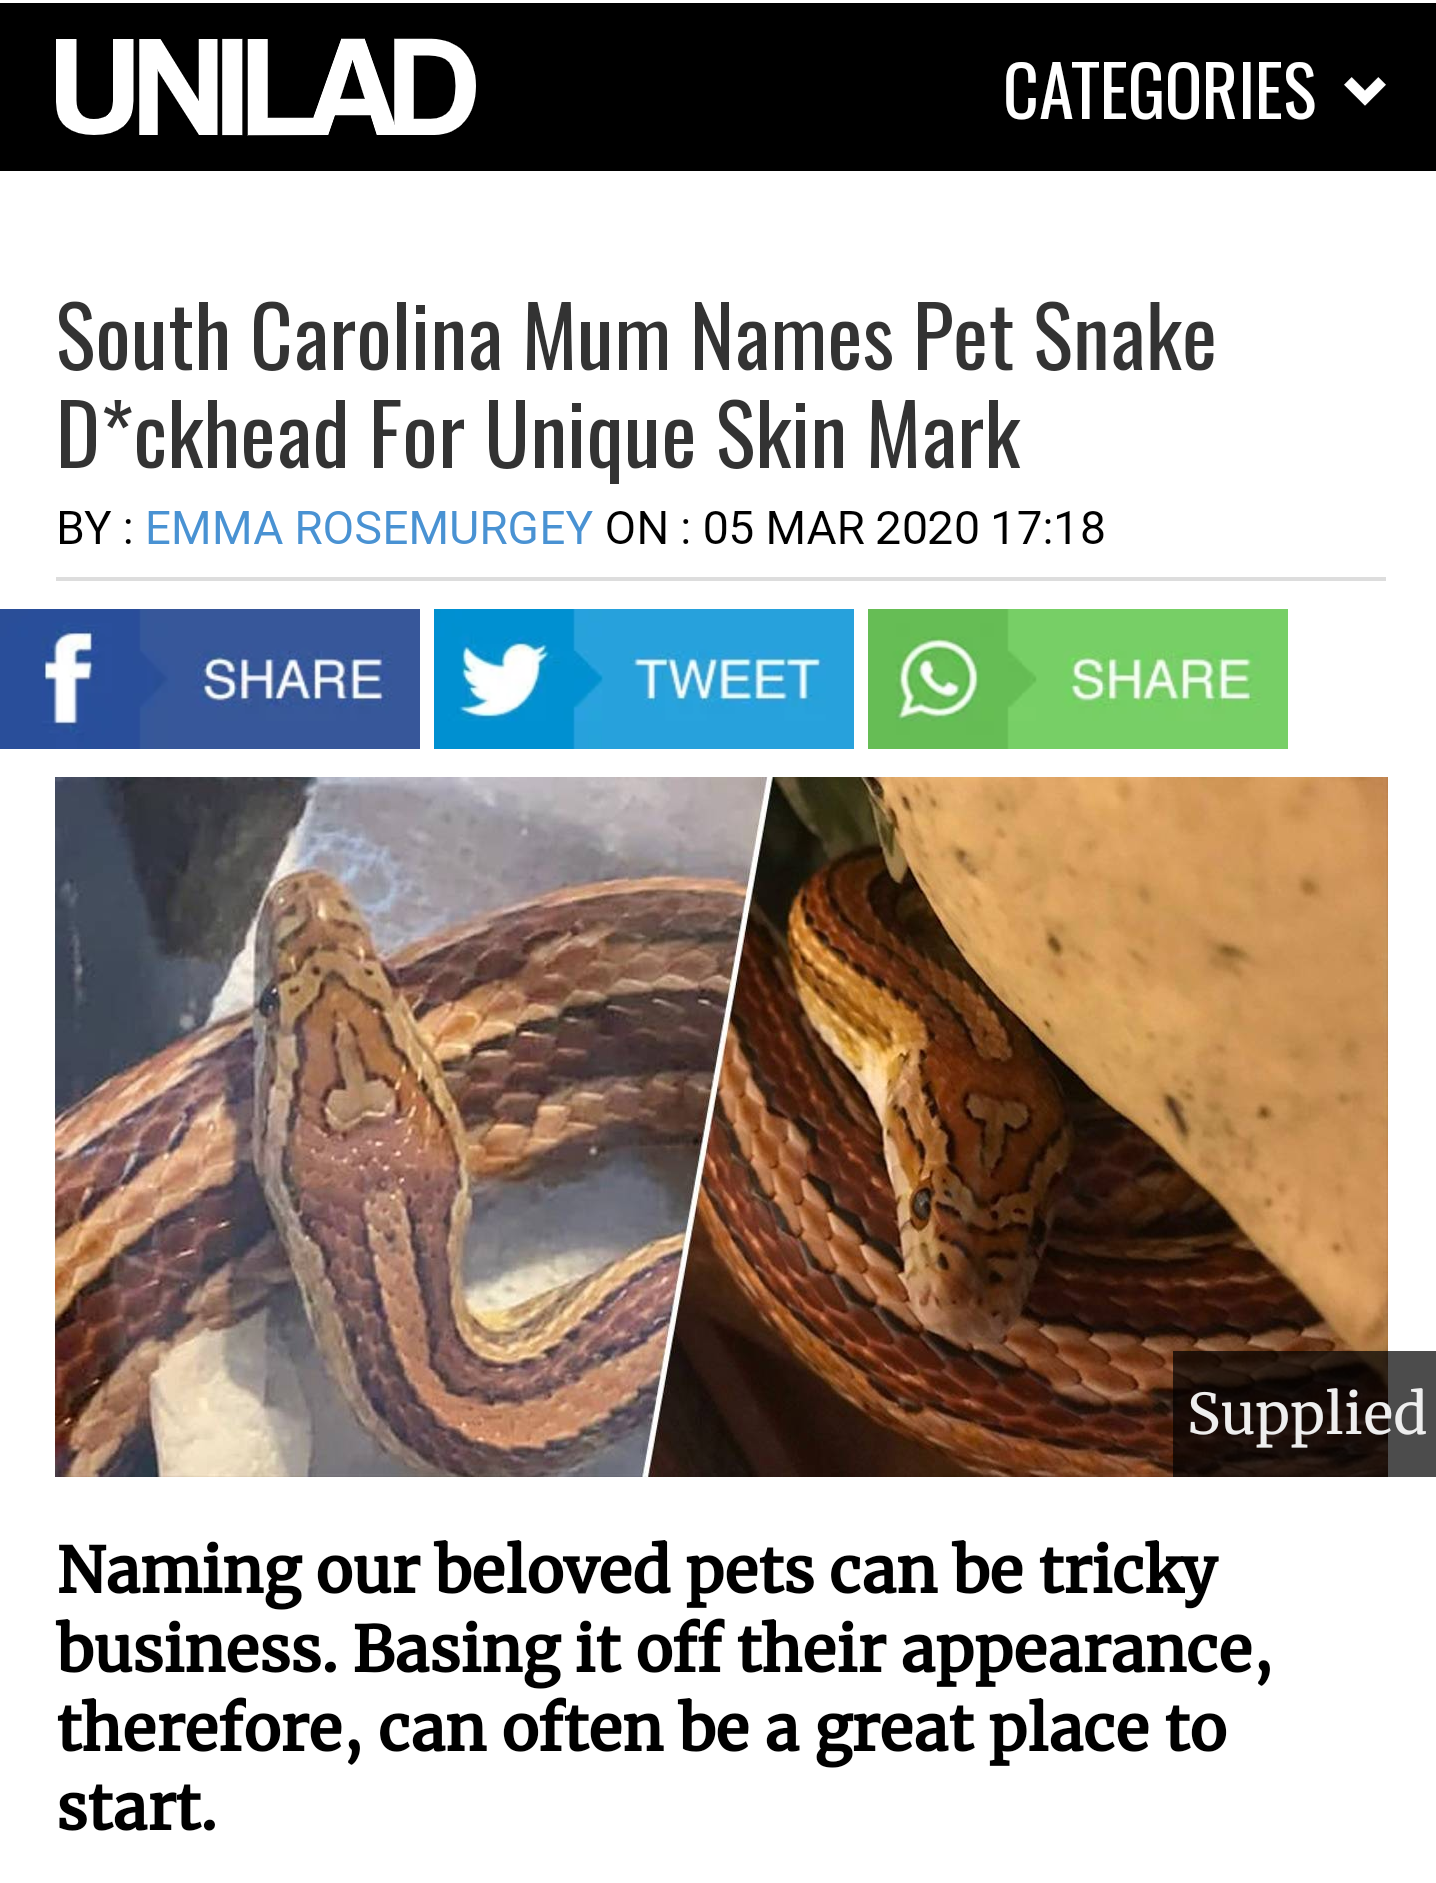 Unilad Categories South Carolina Mum Names Pet Snake Dckhead For Unique Skin Mark By Emma Rosemurgey On f Y Tweet Supplied Naming our beloved pets can be tricky business. Basing it off their appearance, therefore, can often be a great place to start.